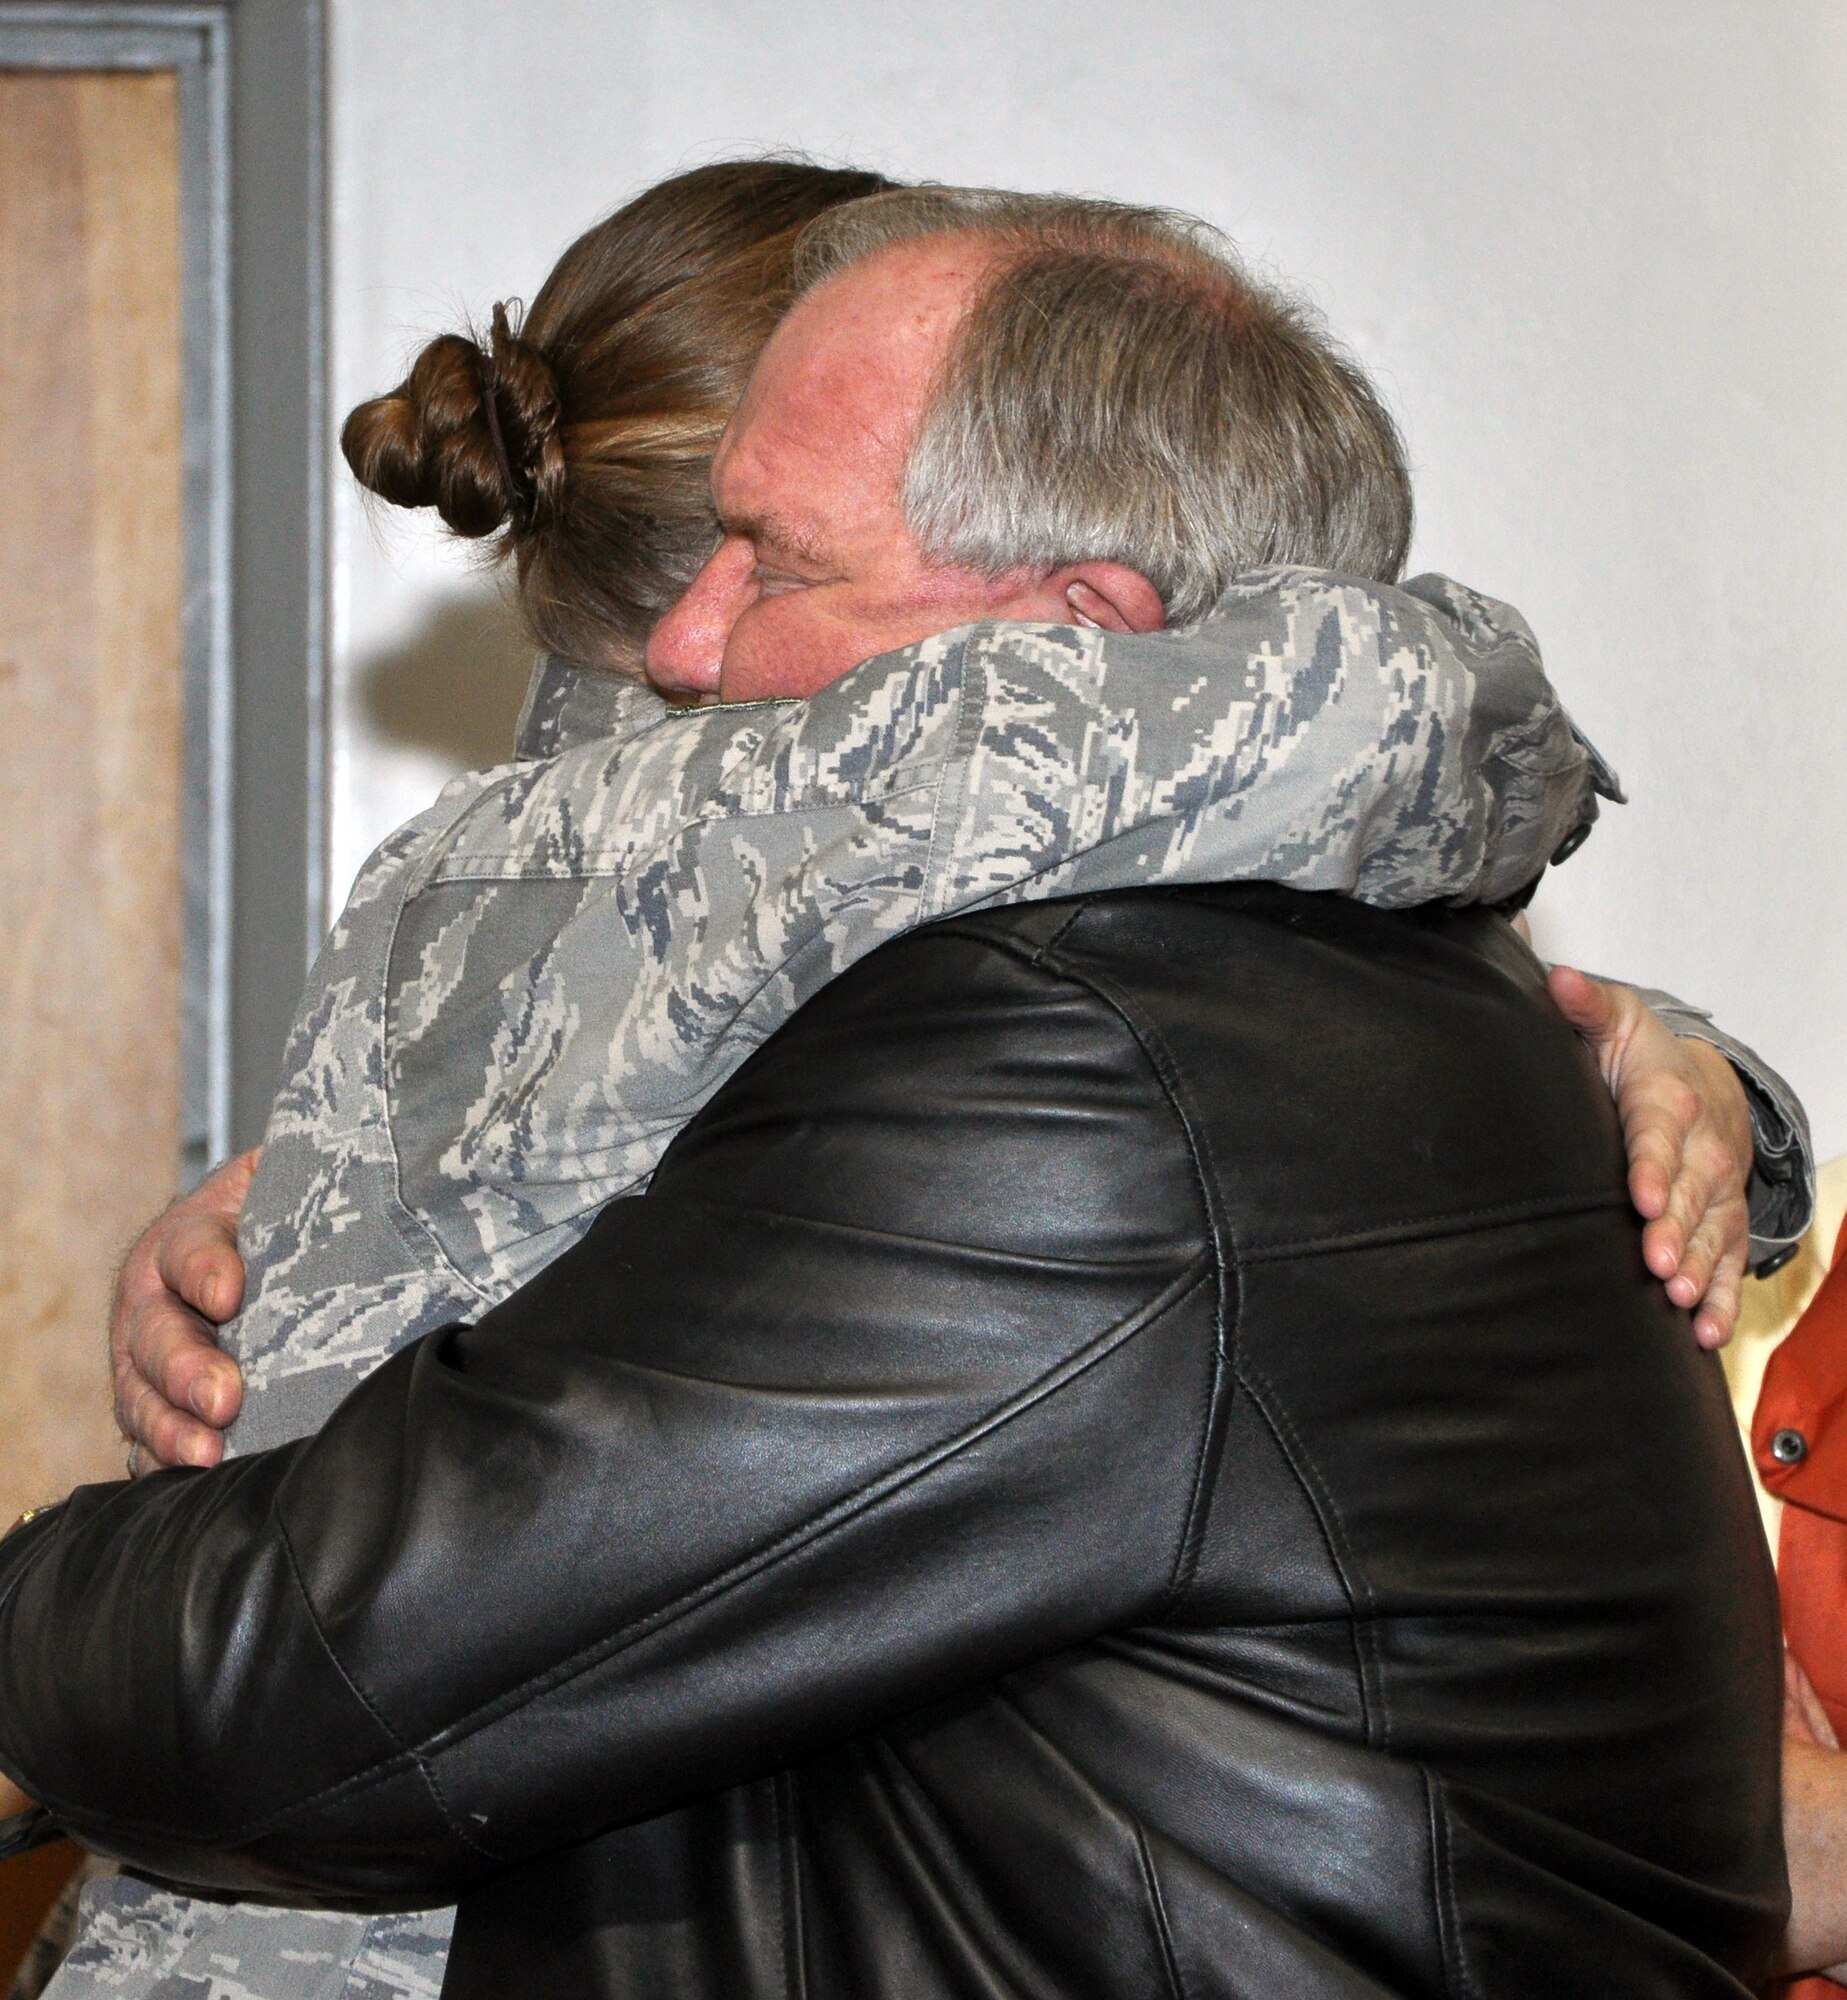 Staff Sgt. Ann Horstmann, 442nd Aircraft Maintenance Squadron weapons loader, hugs her dad before she deployed Dec. 28, 2011. Approximately 130 reservists from the 442nd Fighter Wing deployed to Afghanistan in support of Operation Enduring Freedom. The 442nd FW is an A-10 Thunderbolt II Air Force Reserve unit at Whiteman Air Force Base, Mo. (U.S. Air Force photo/Senior Airman Wesley Wright)